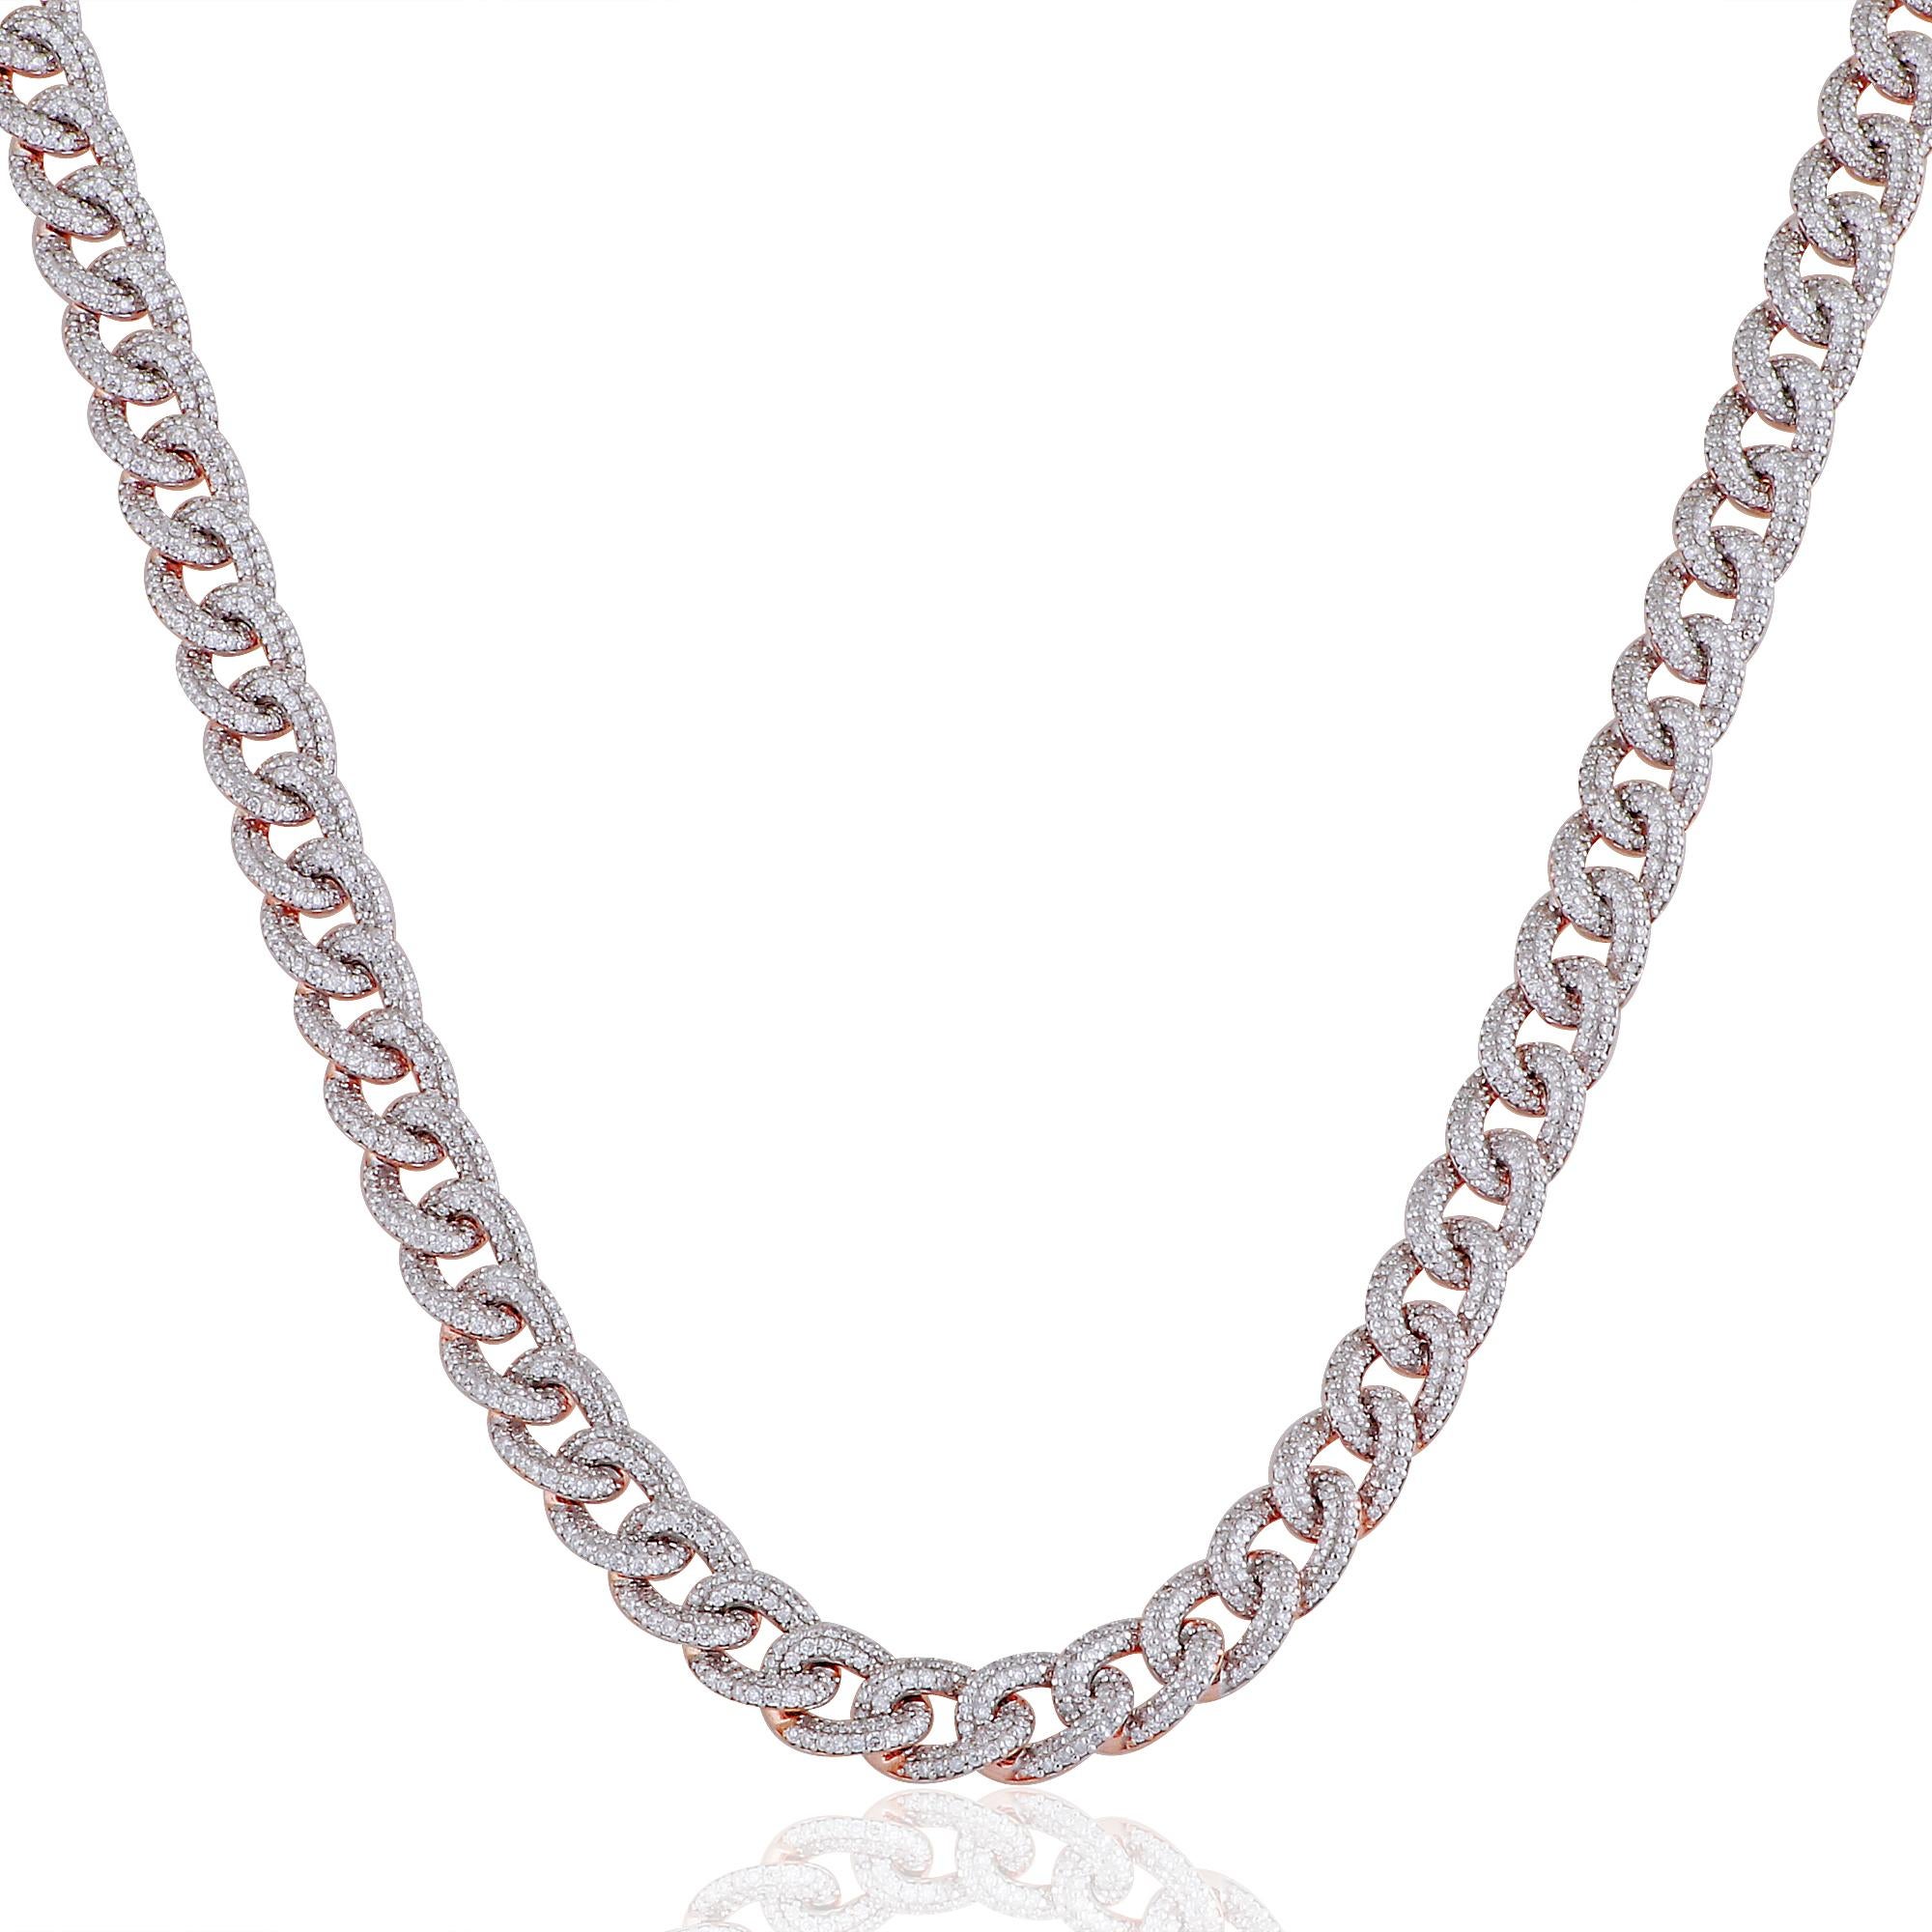 Elevate your style and make a lasting impression with this SI/HI Diamond Pave Cuban Link Chain Necklace. It is a testament to exceptional craftsmanship, timeless elegance, and the enduring beauty of fine jewelry. Experience the allure of pave